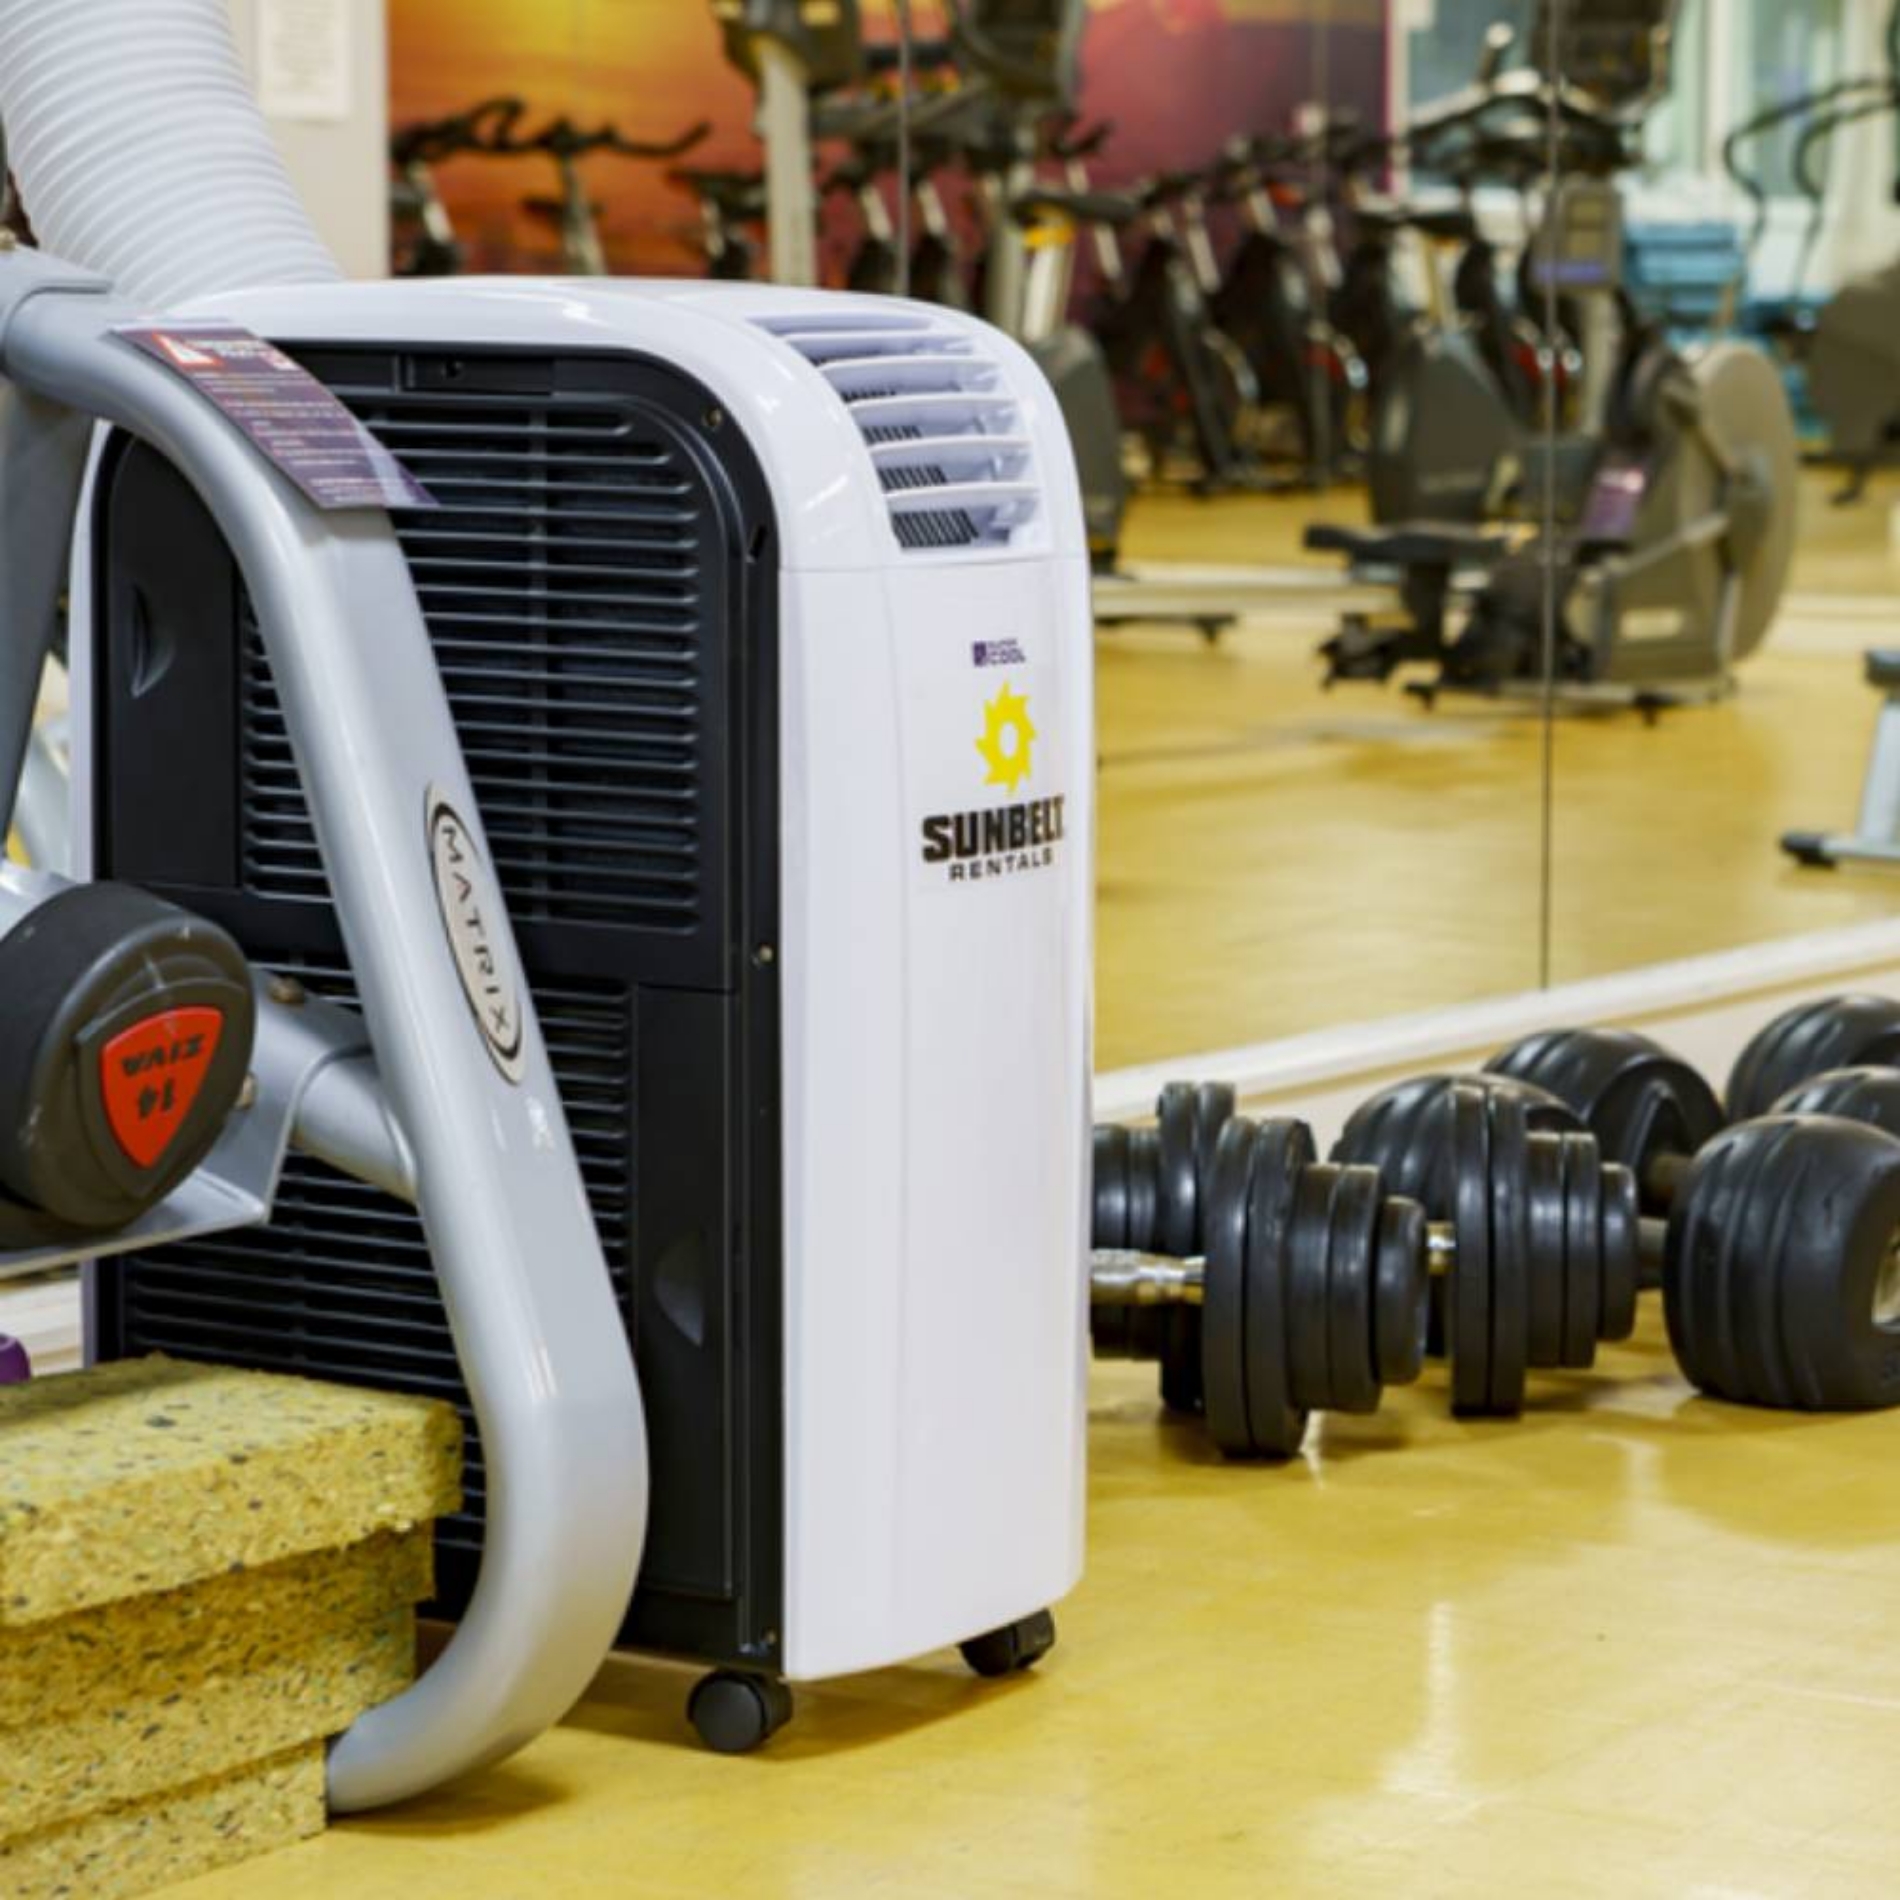 Fral SC14 4.1kW Portable Air Conditioning being used in a gym studio